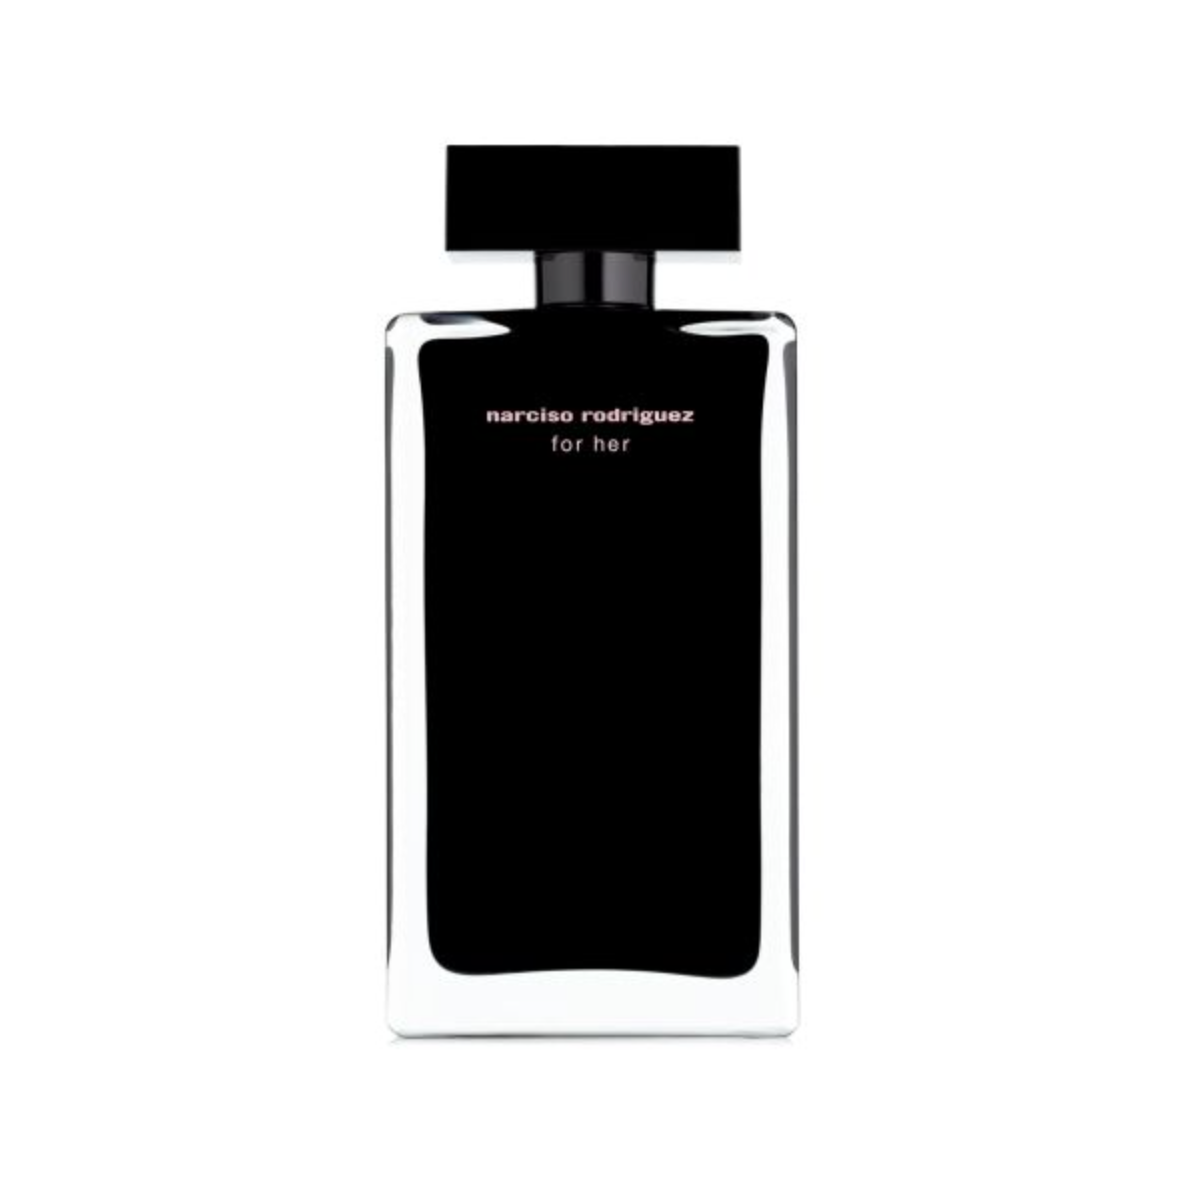 Narciso Rodriguez for her被許多人認證為斬男香。（圖片來源：Narciso Rodriguez官網）